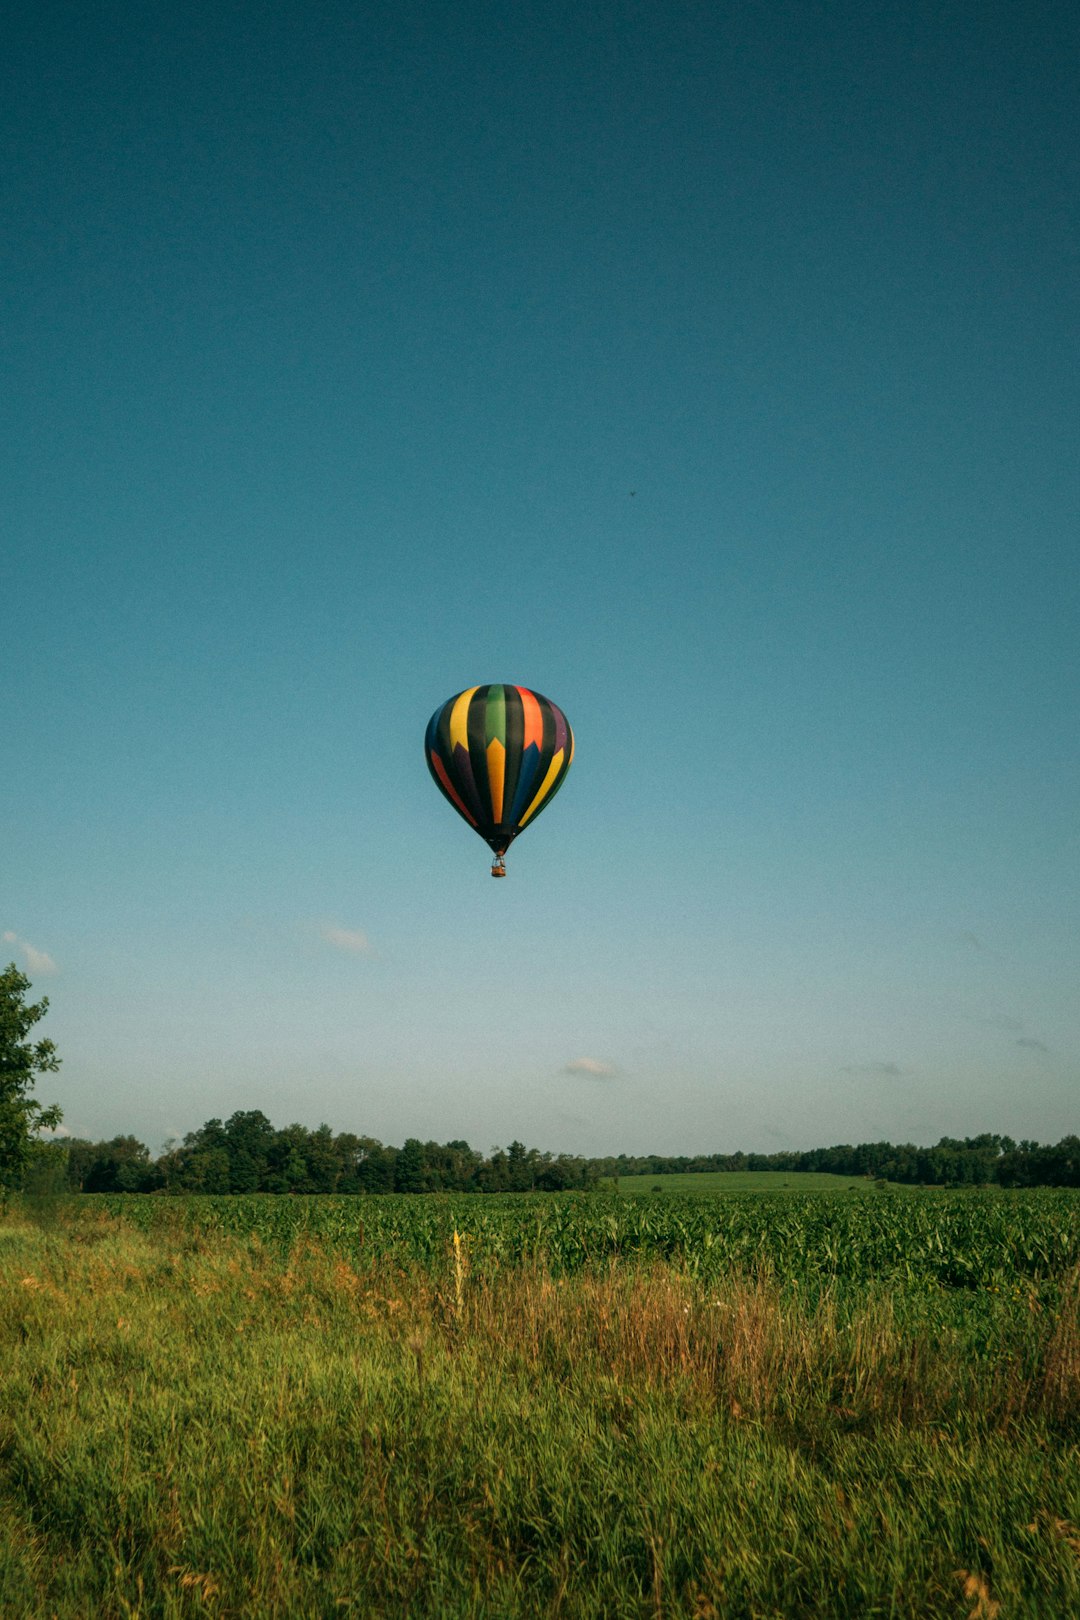 yellow blue and green hot air balloon in mid air during daytime